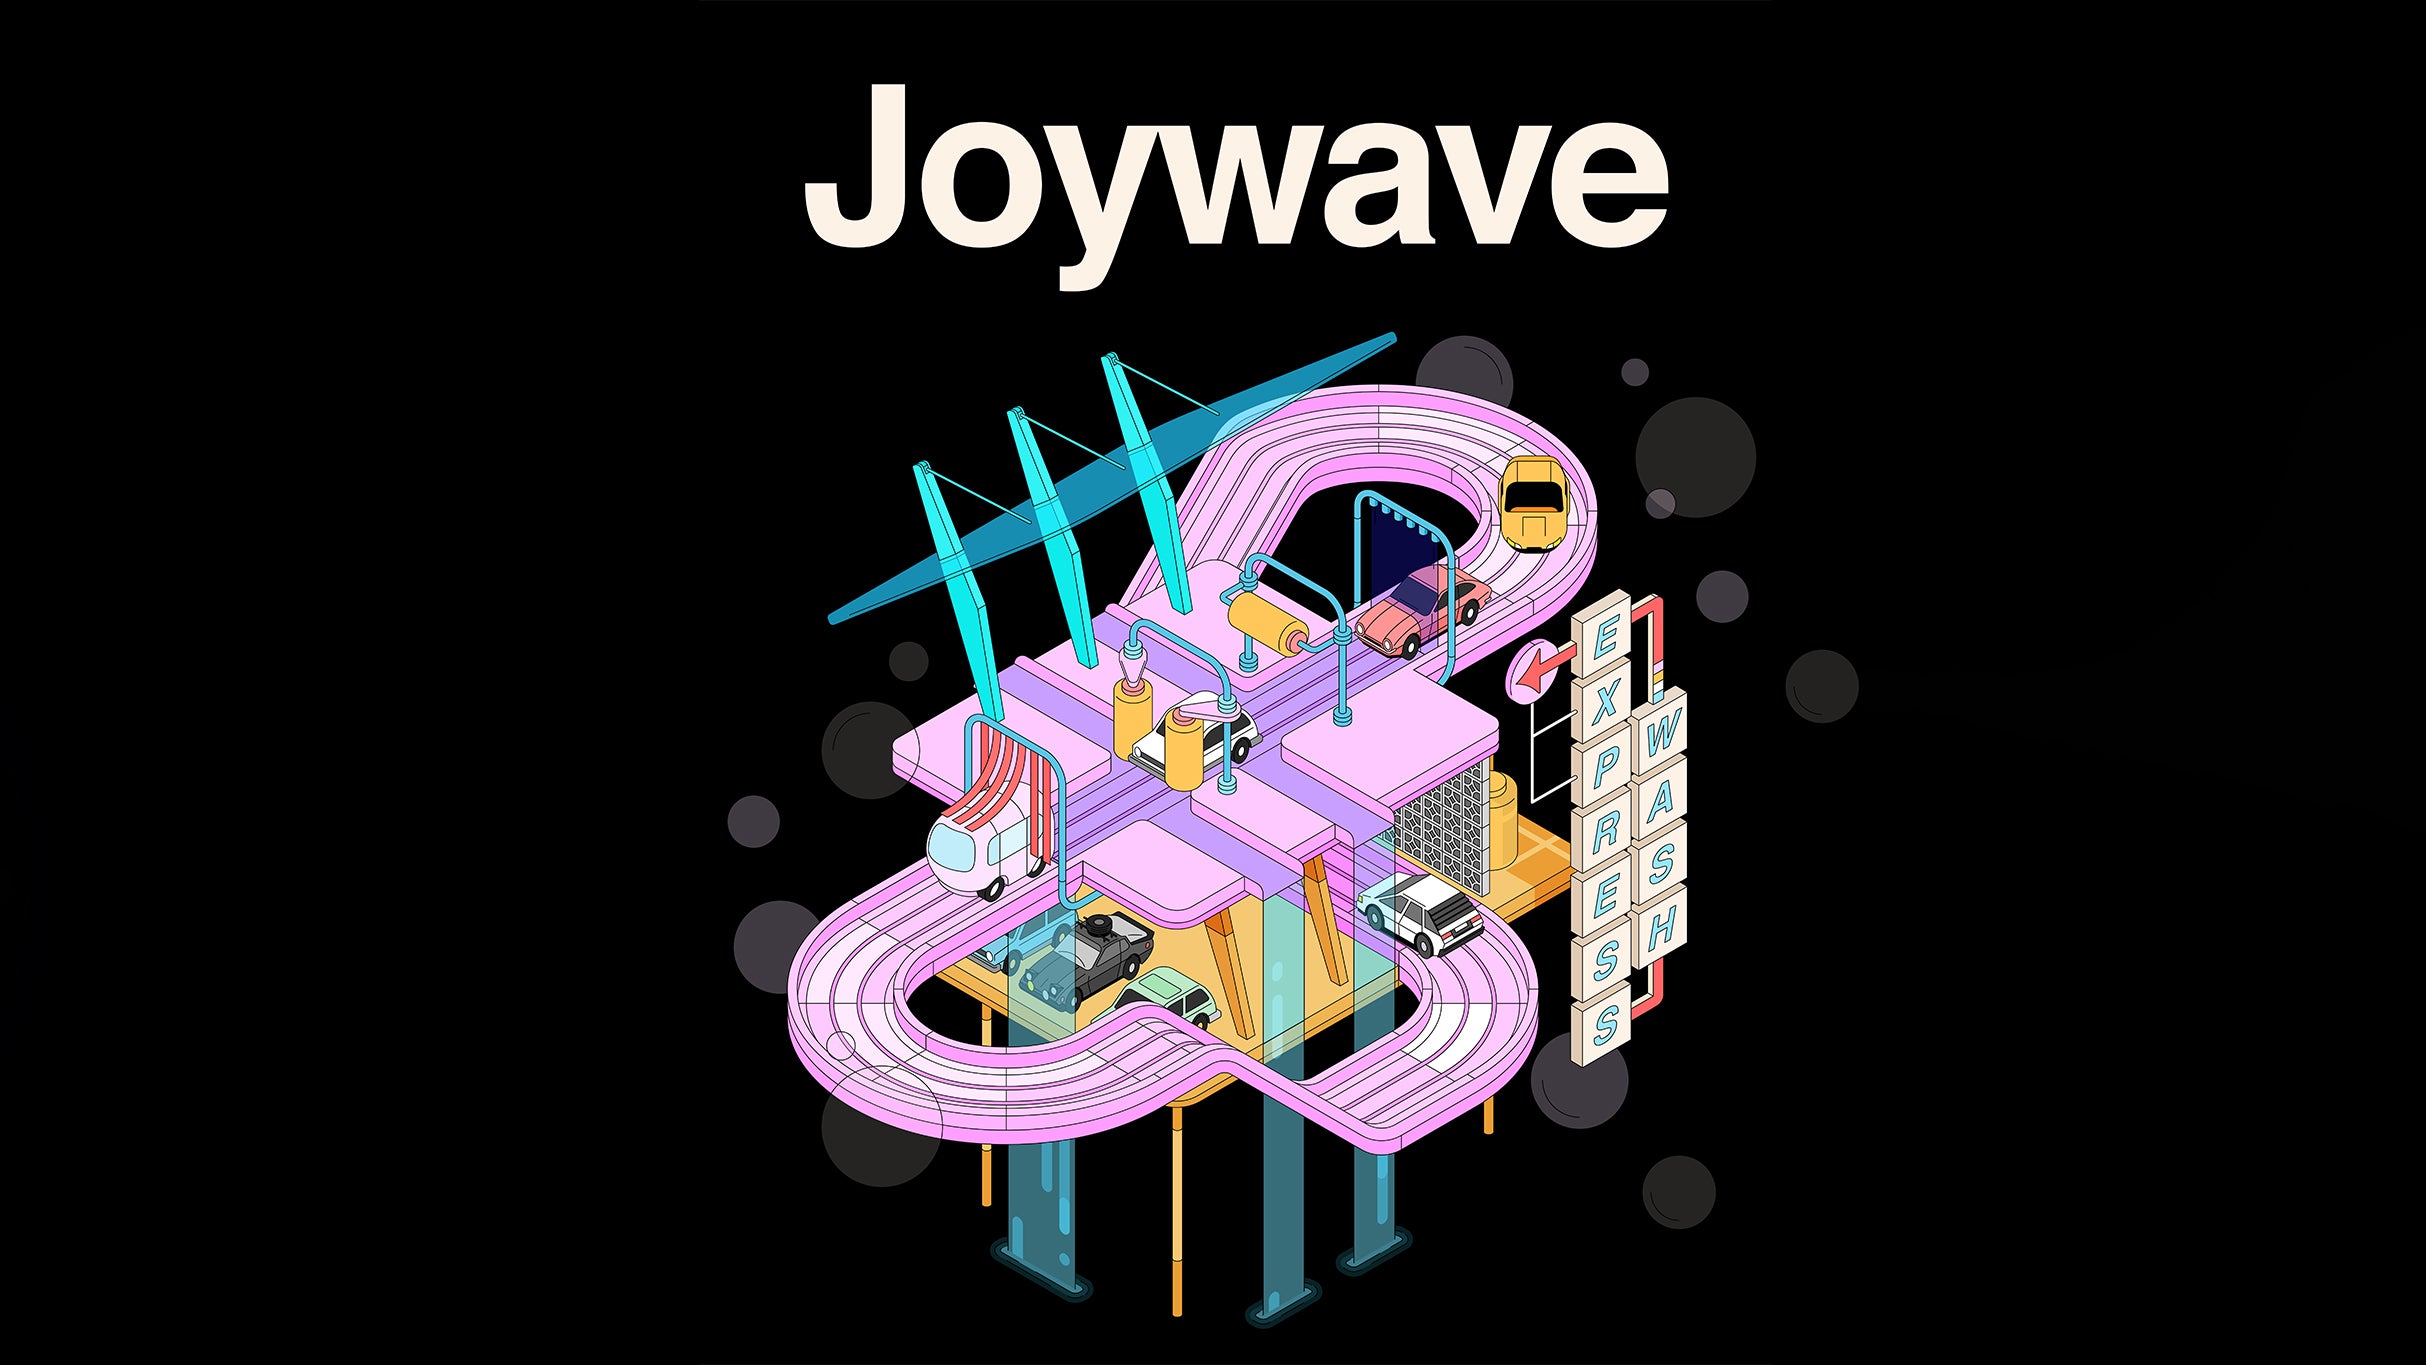 Joywave with special guest Joe P solo in Asbury Park promo photo for Artist presale offer code